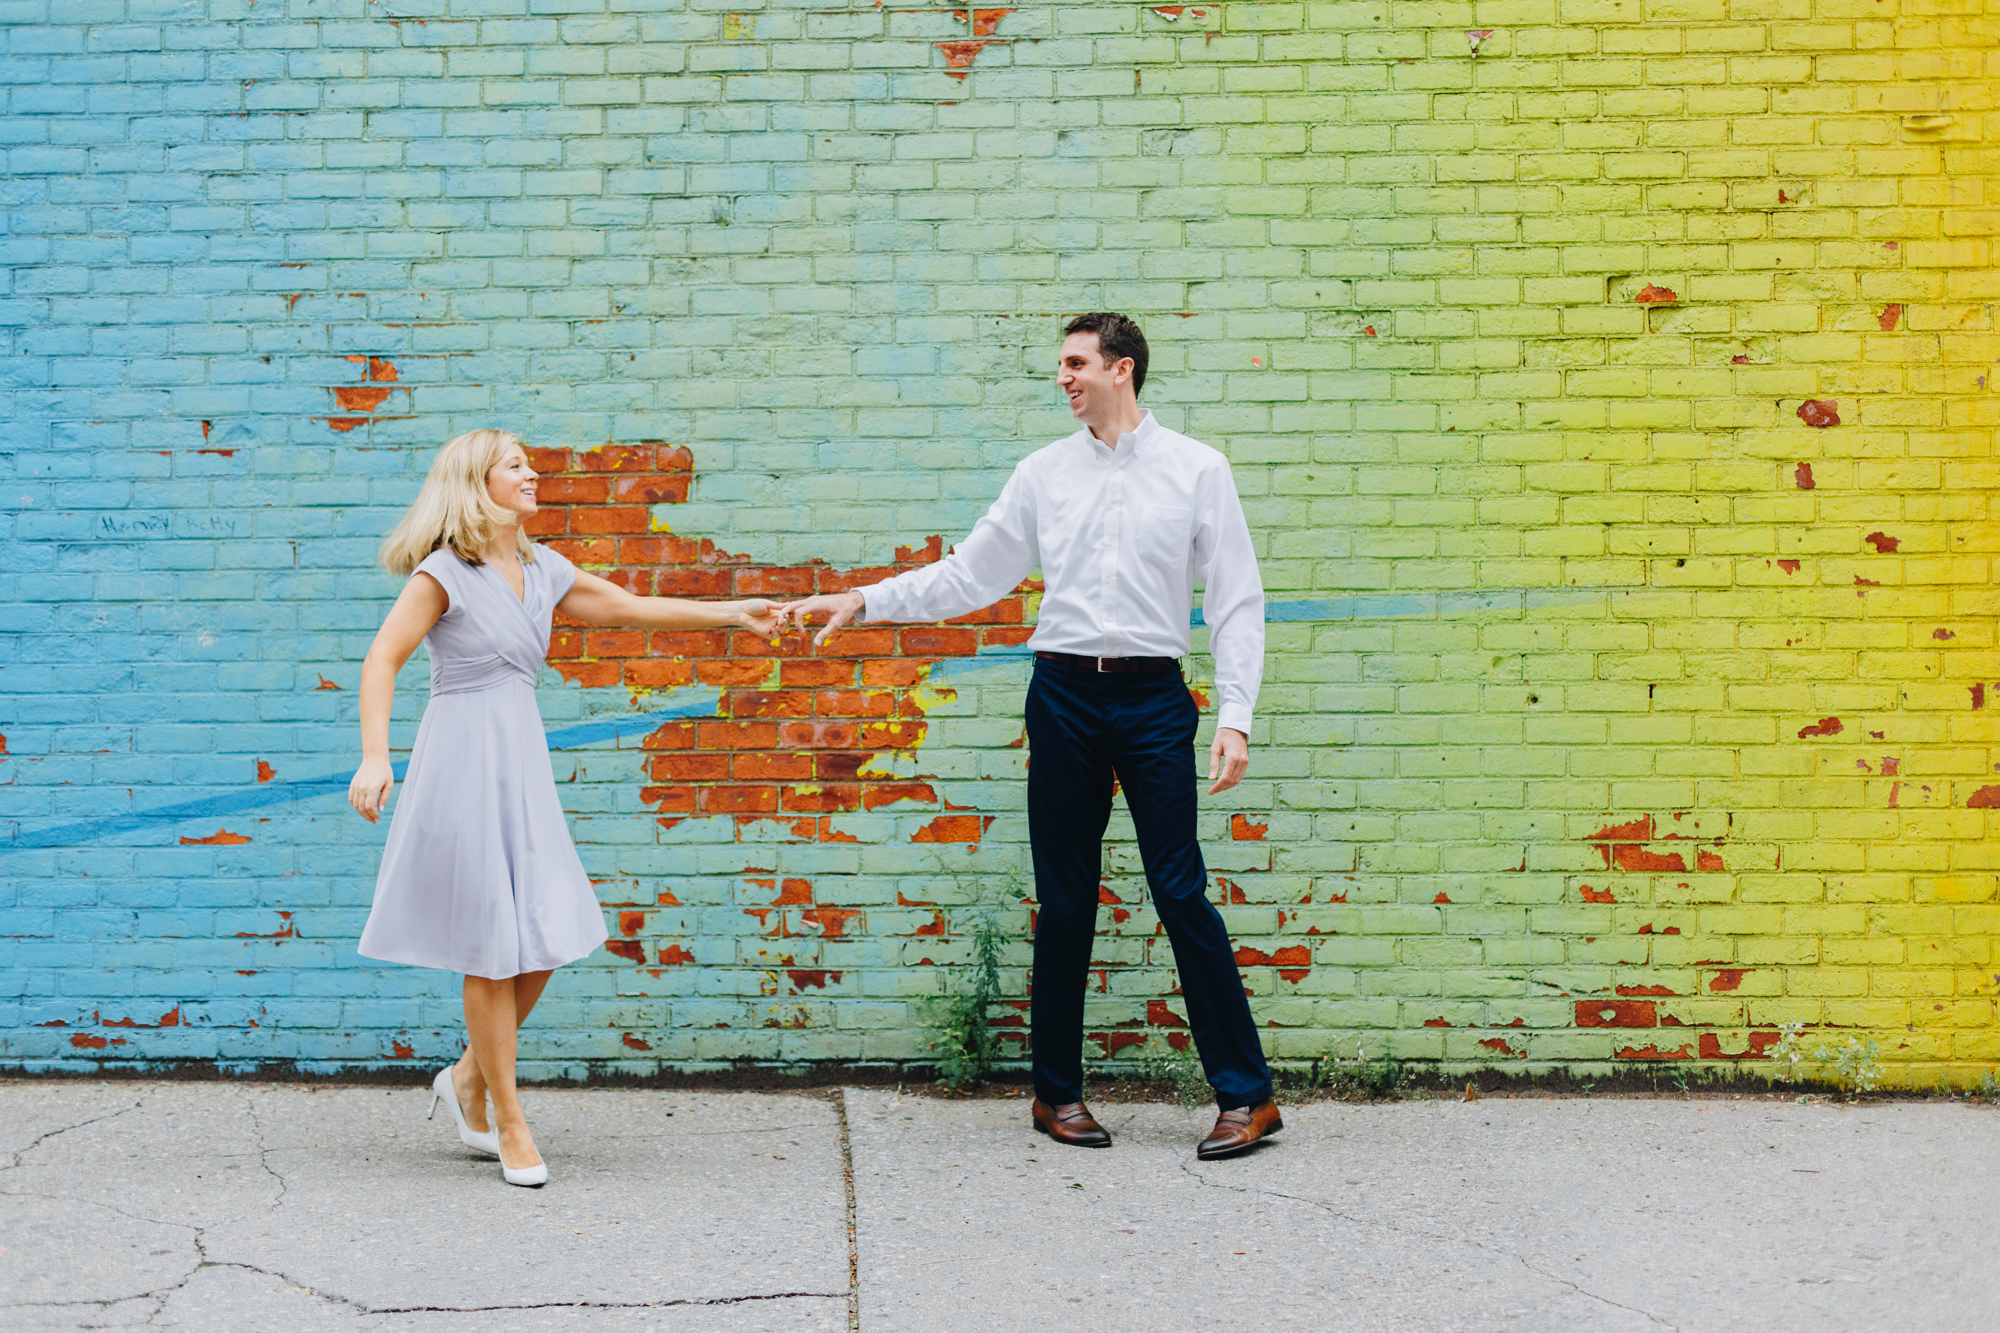 Charming Brooklyn Bridge Park Engagement Photos on a Cloudy Day in New York